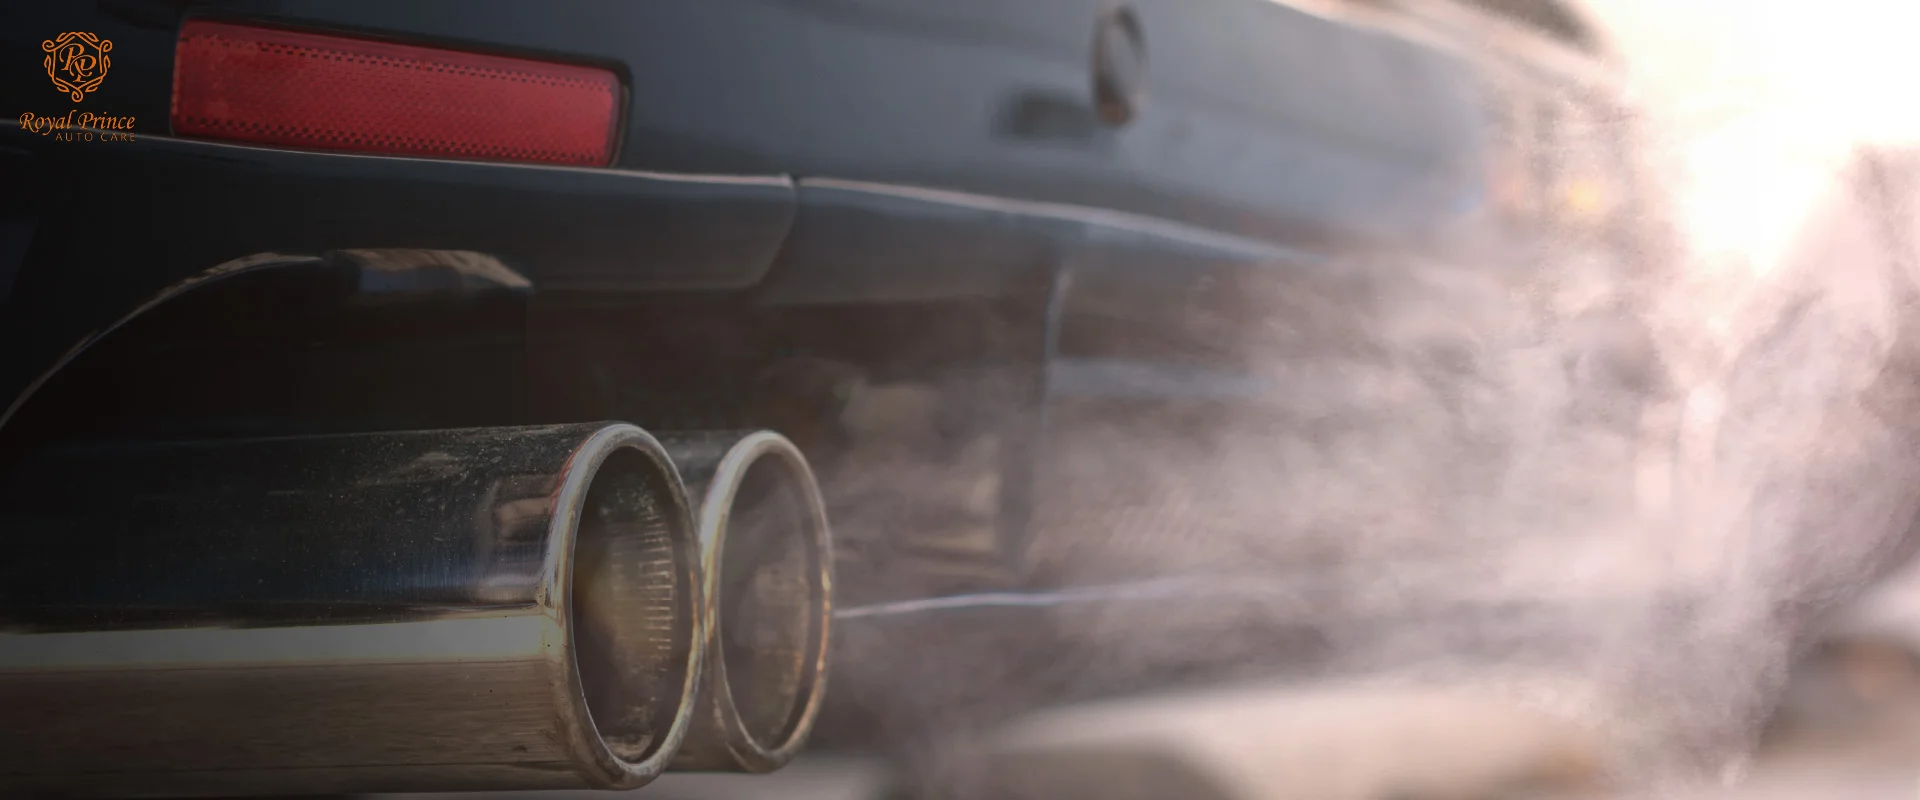 Common Car Exhaust Issues and How to Fix Them